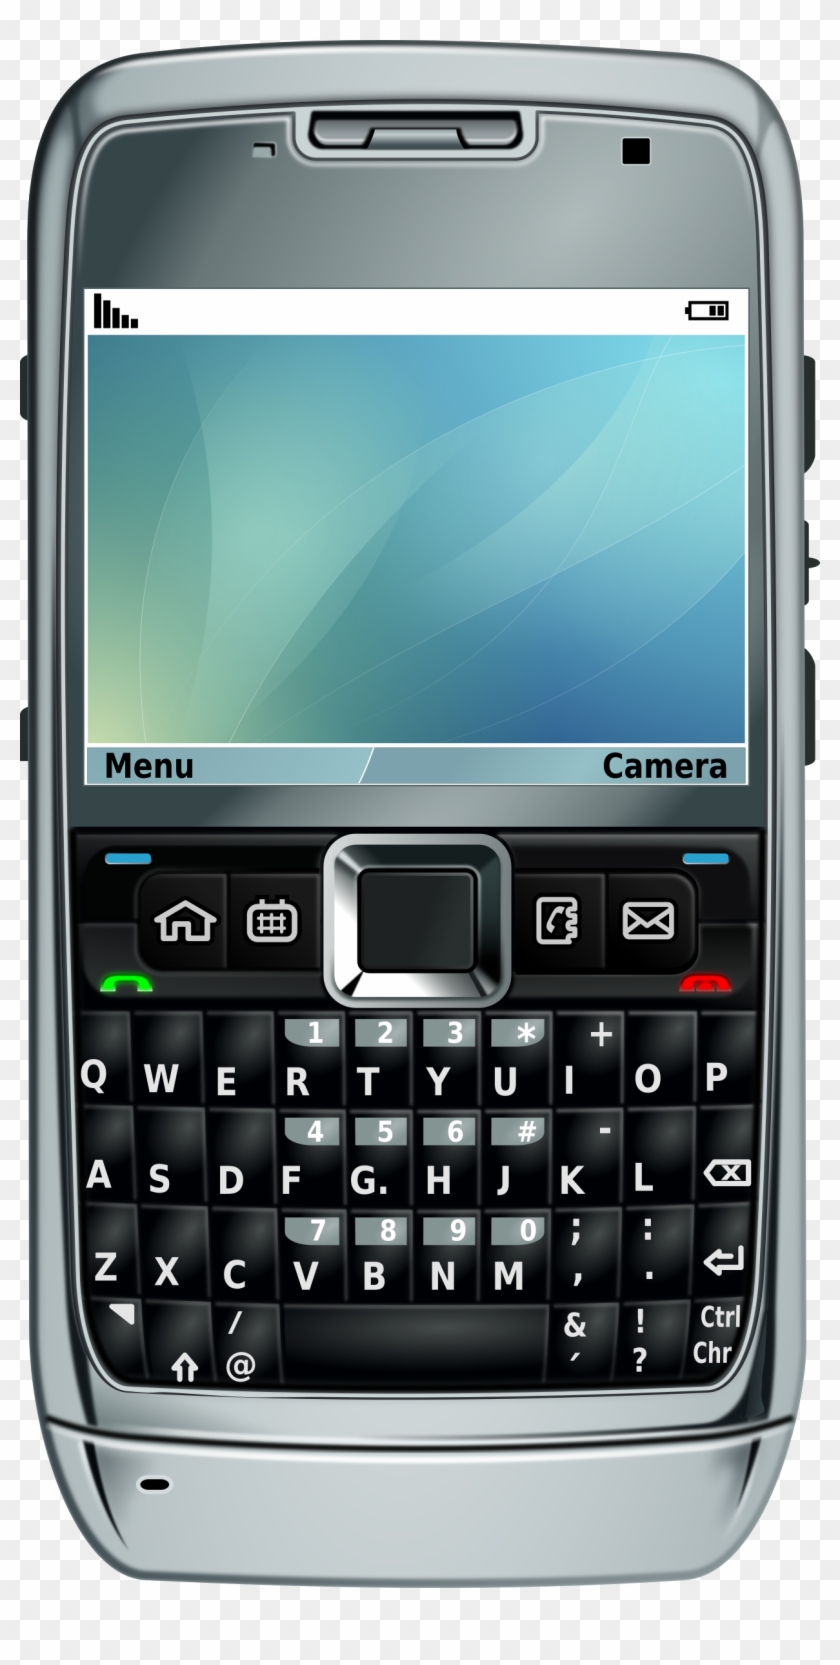 This Free Icons Png Design Of Smartphone E71 Clipart #777644